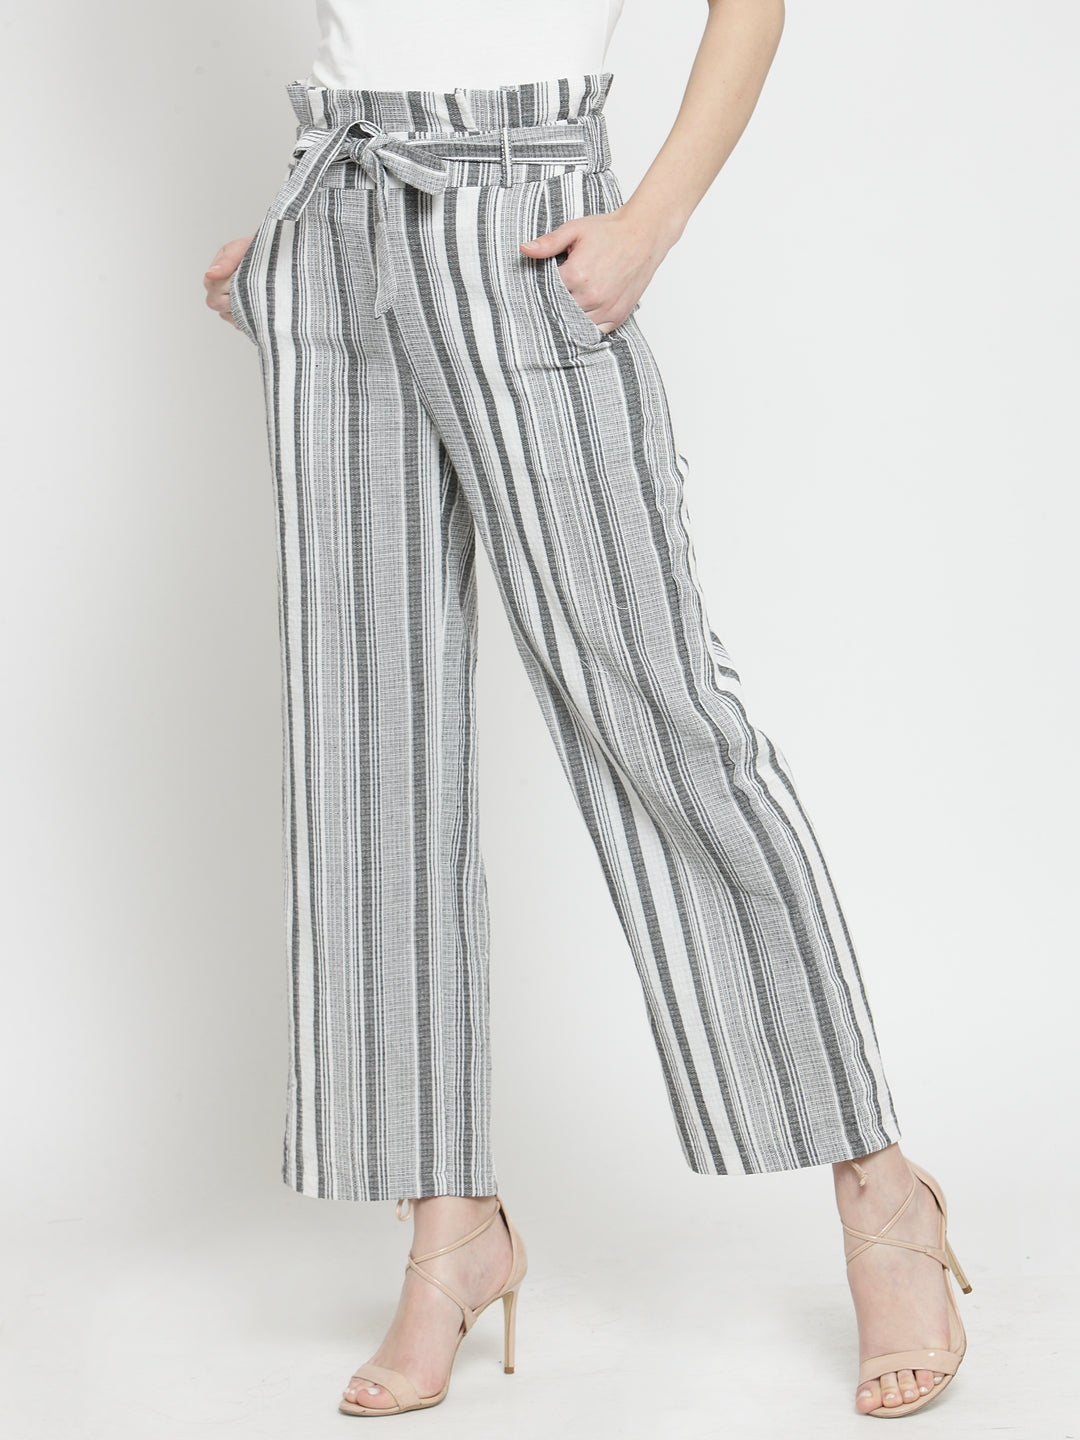 Women Grey Striped Relaxed Fit Lower